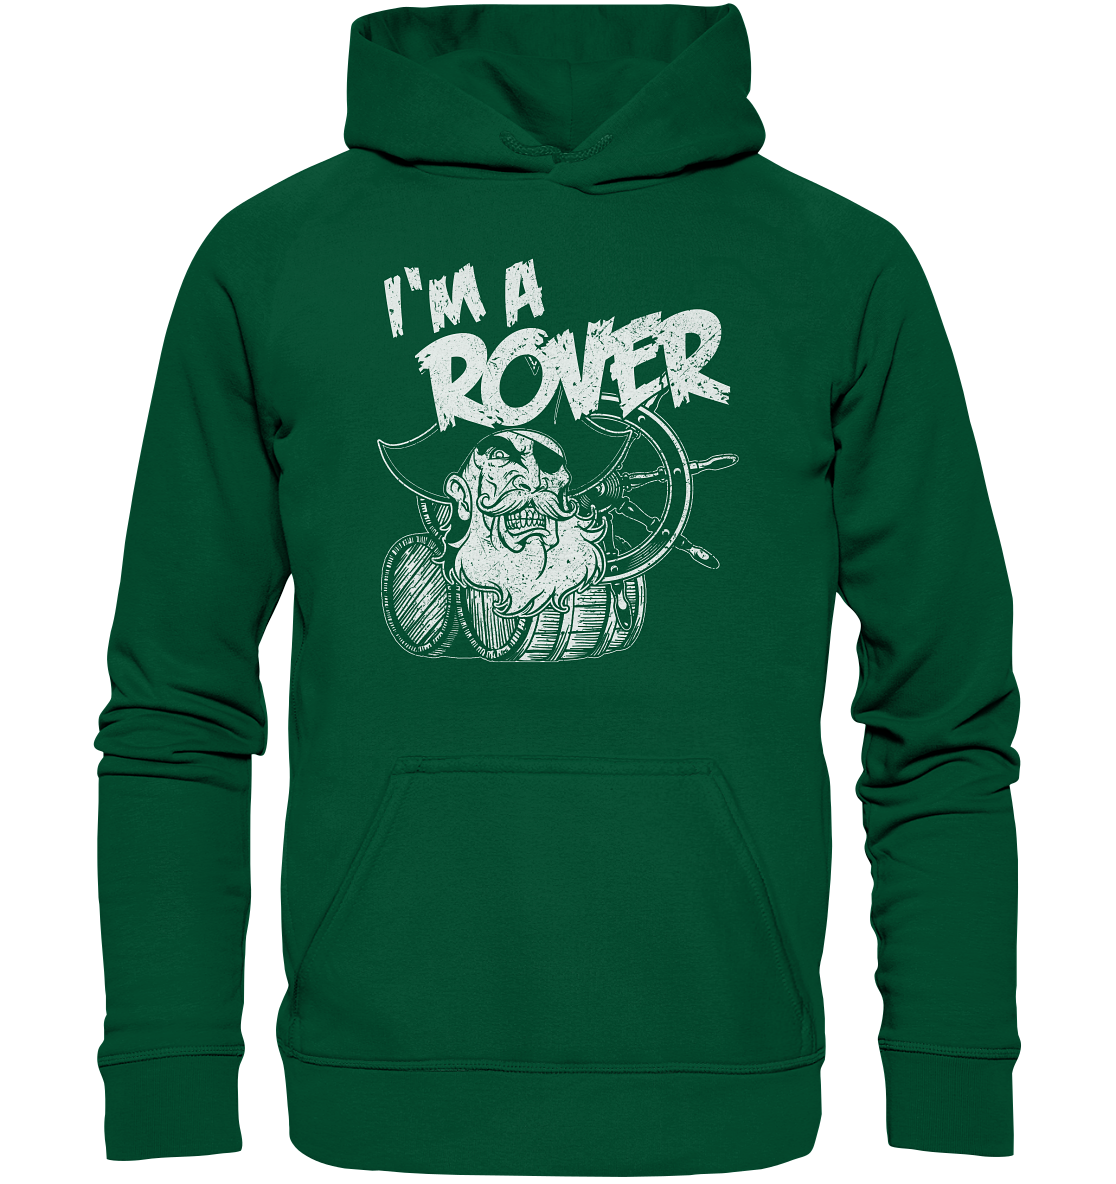 I'm A Rover "Pirate" - Basic Unisex Hoodie